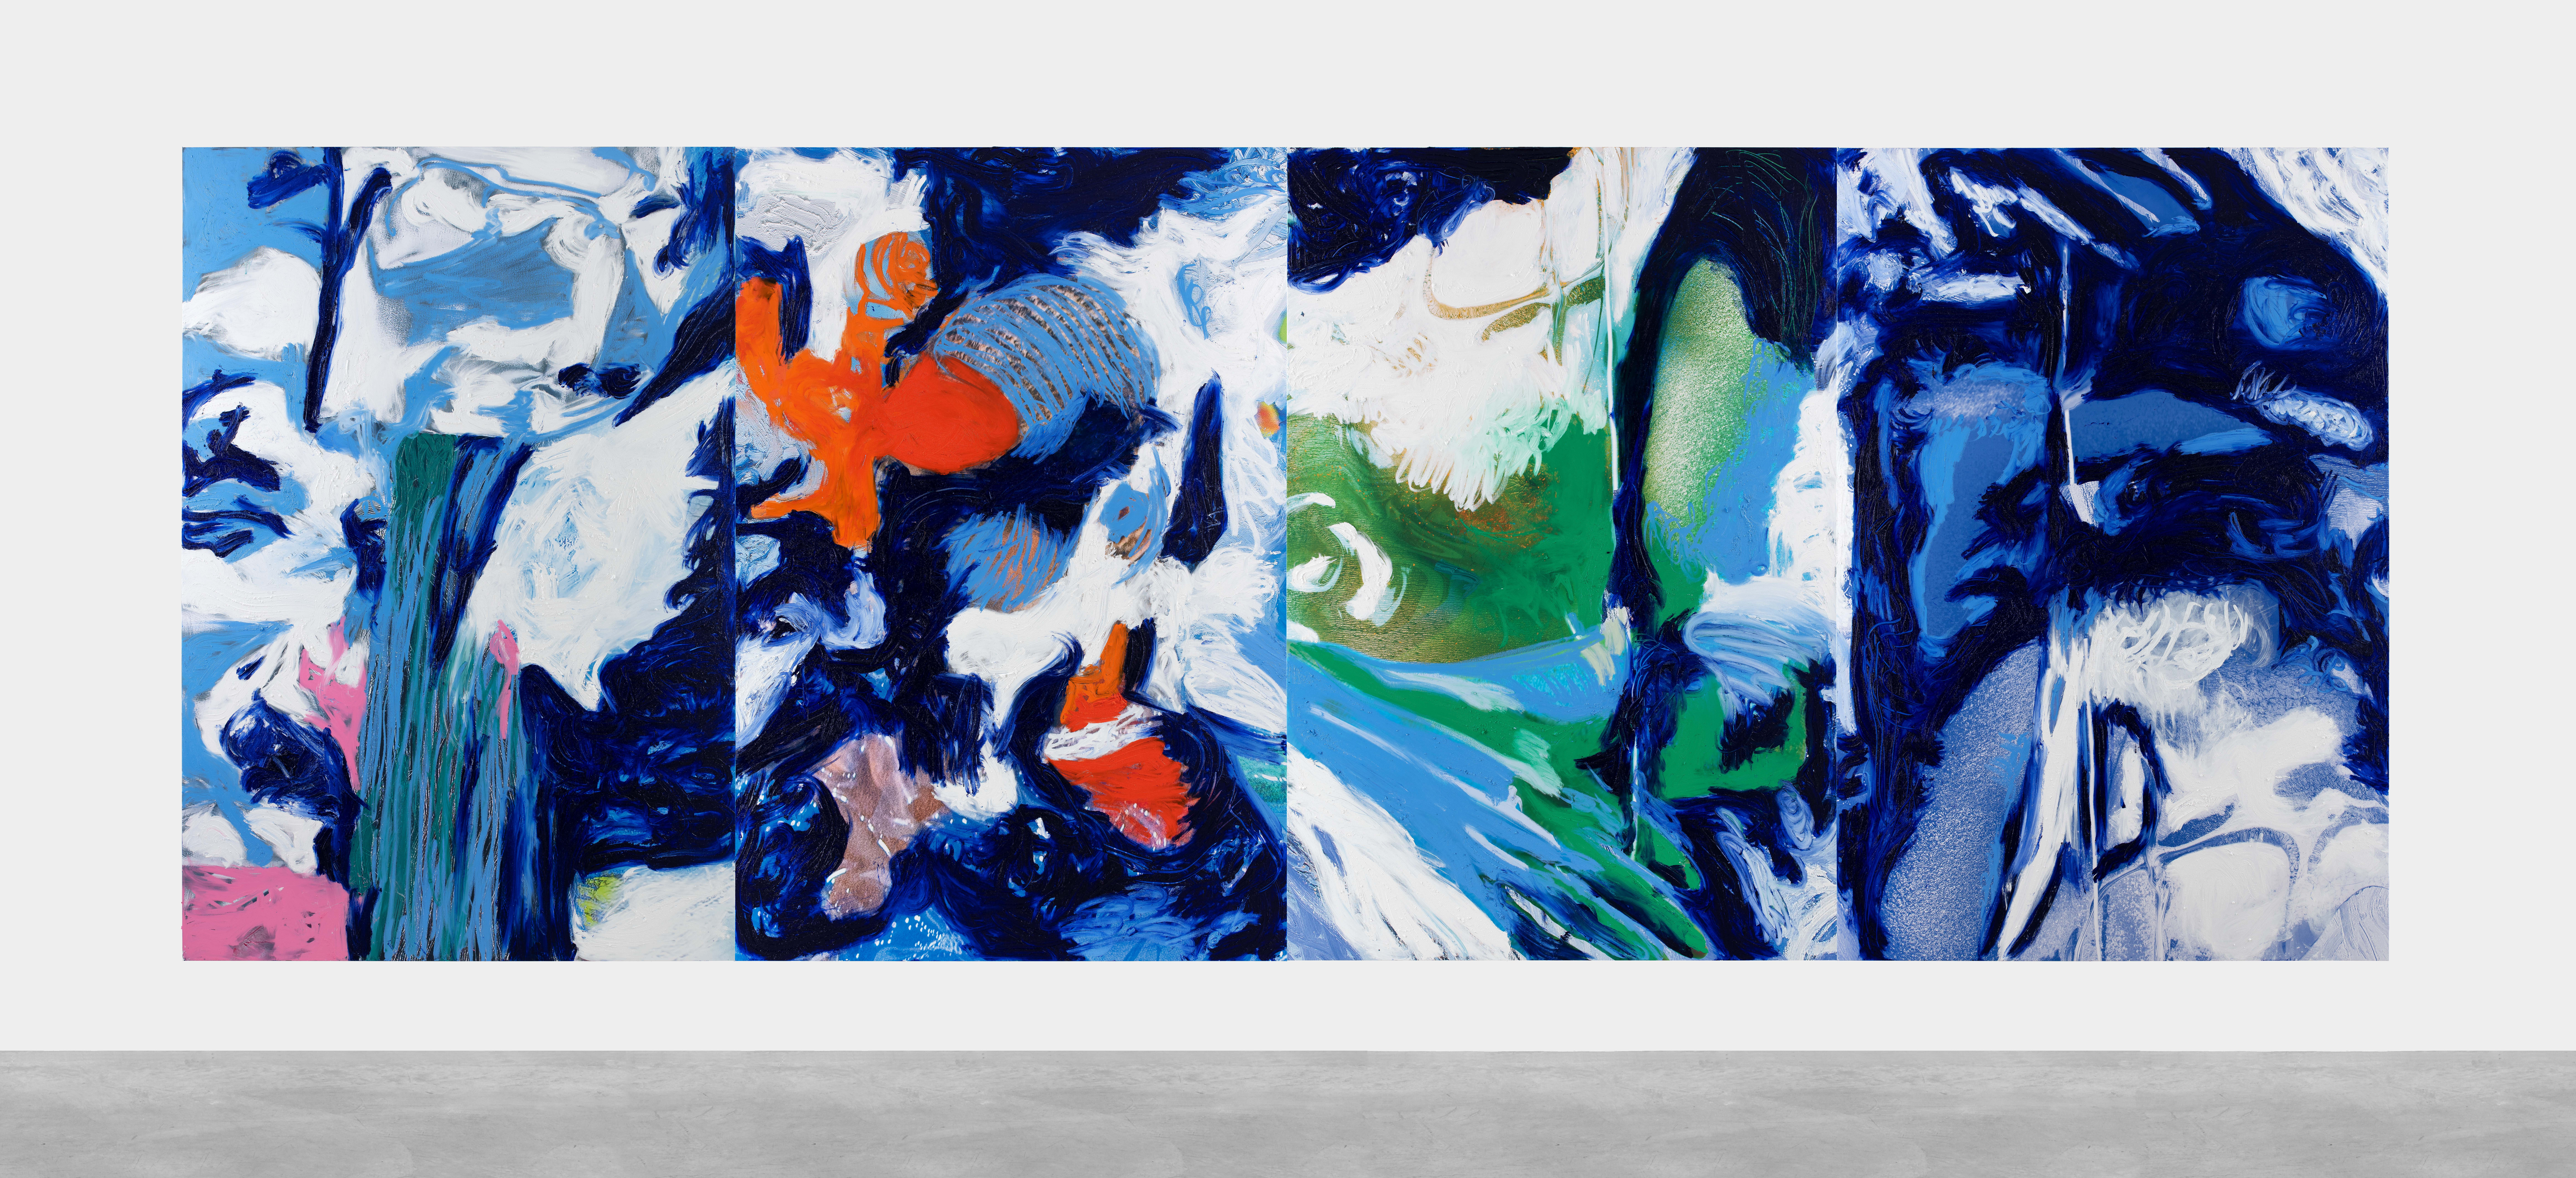 A photograph of four abstract paintings with oil paint mixed with sand, on top of a digital print on canvas. The paintings are a mix of sky blue, white and different coloured gestures against darker blue backgrounds. They are hung on a white wall, with a grey floor in front of it in the foreground